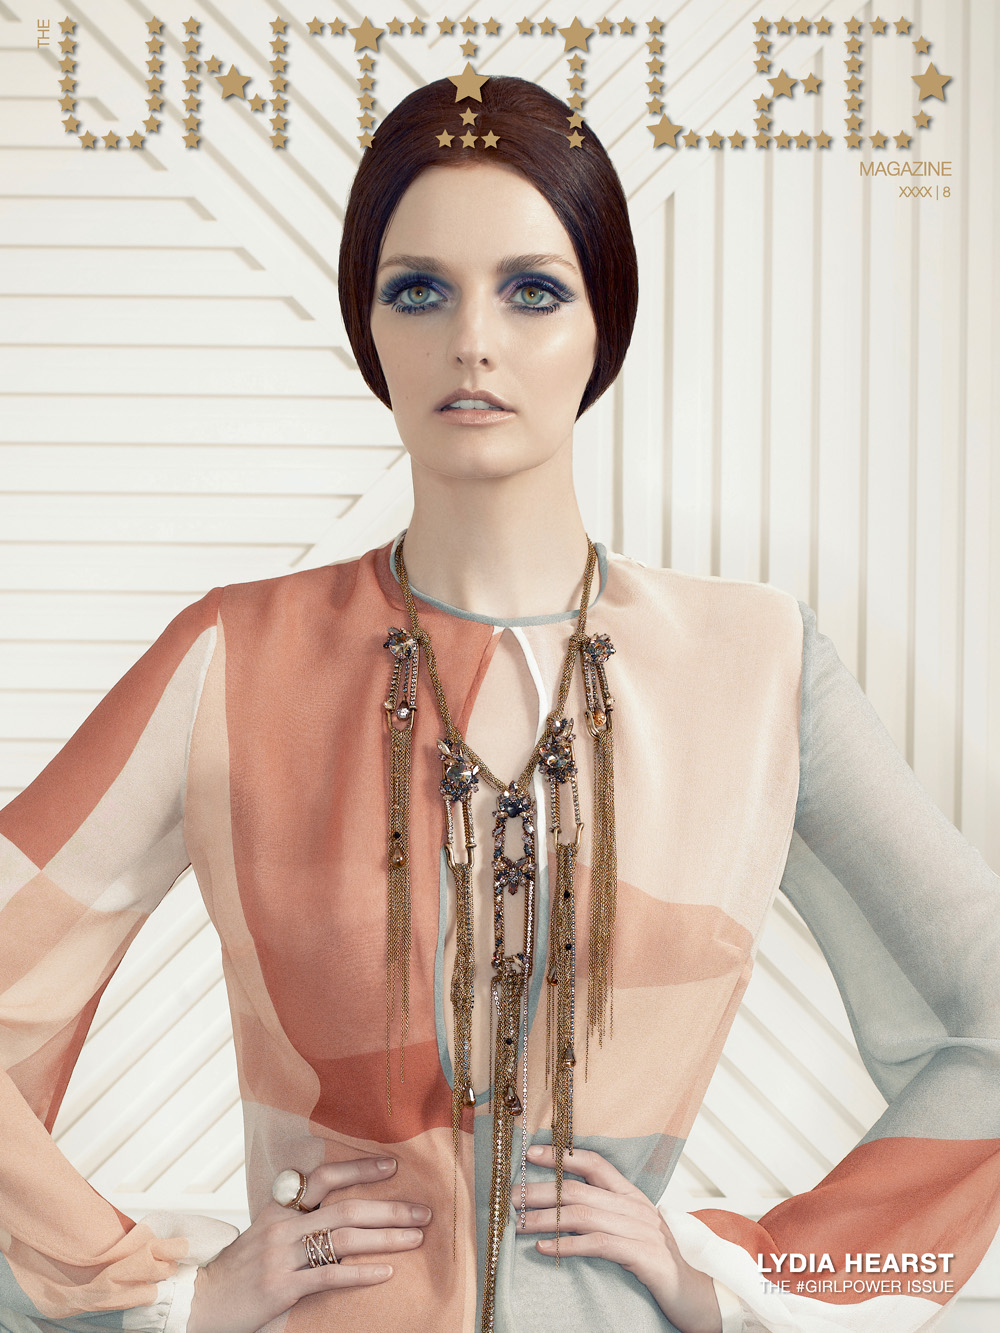 The-Untitled-Magazine-Issue-8-Lydia-Hearst-Cover-LR.jpg